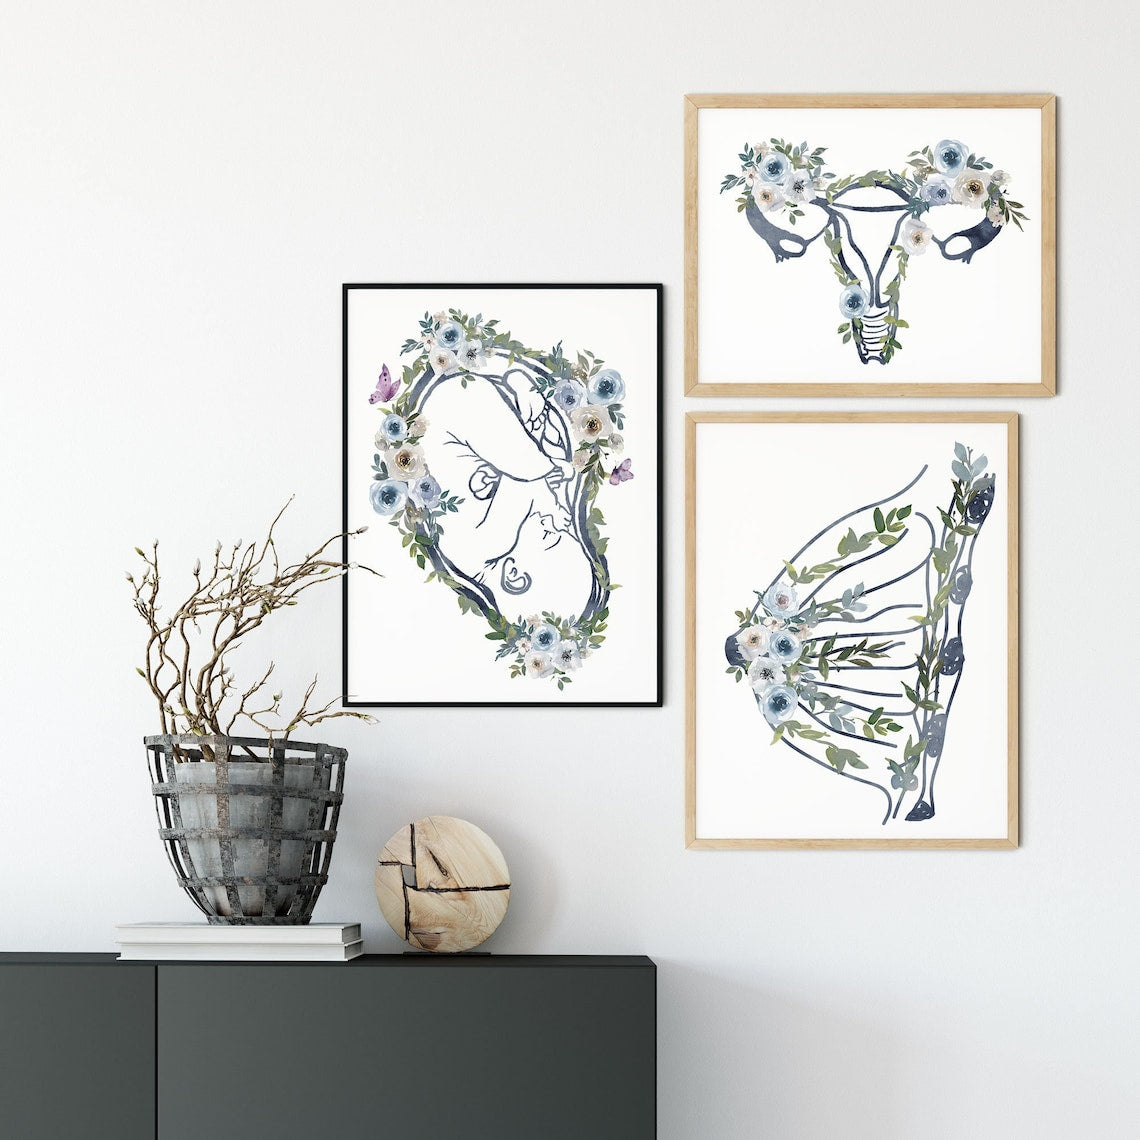 Midwife and Obgyn Art Print - Pregnancy Anatomy Gift for Doula and Gynecologist - Doctor Office Décor - Set of 3